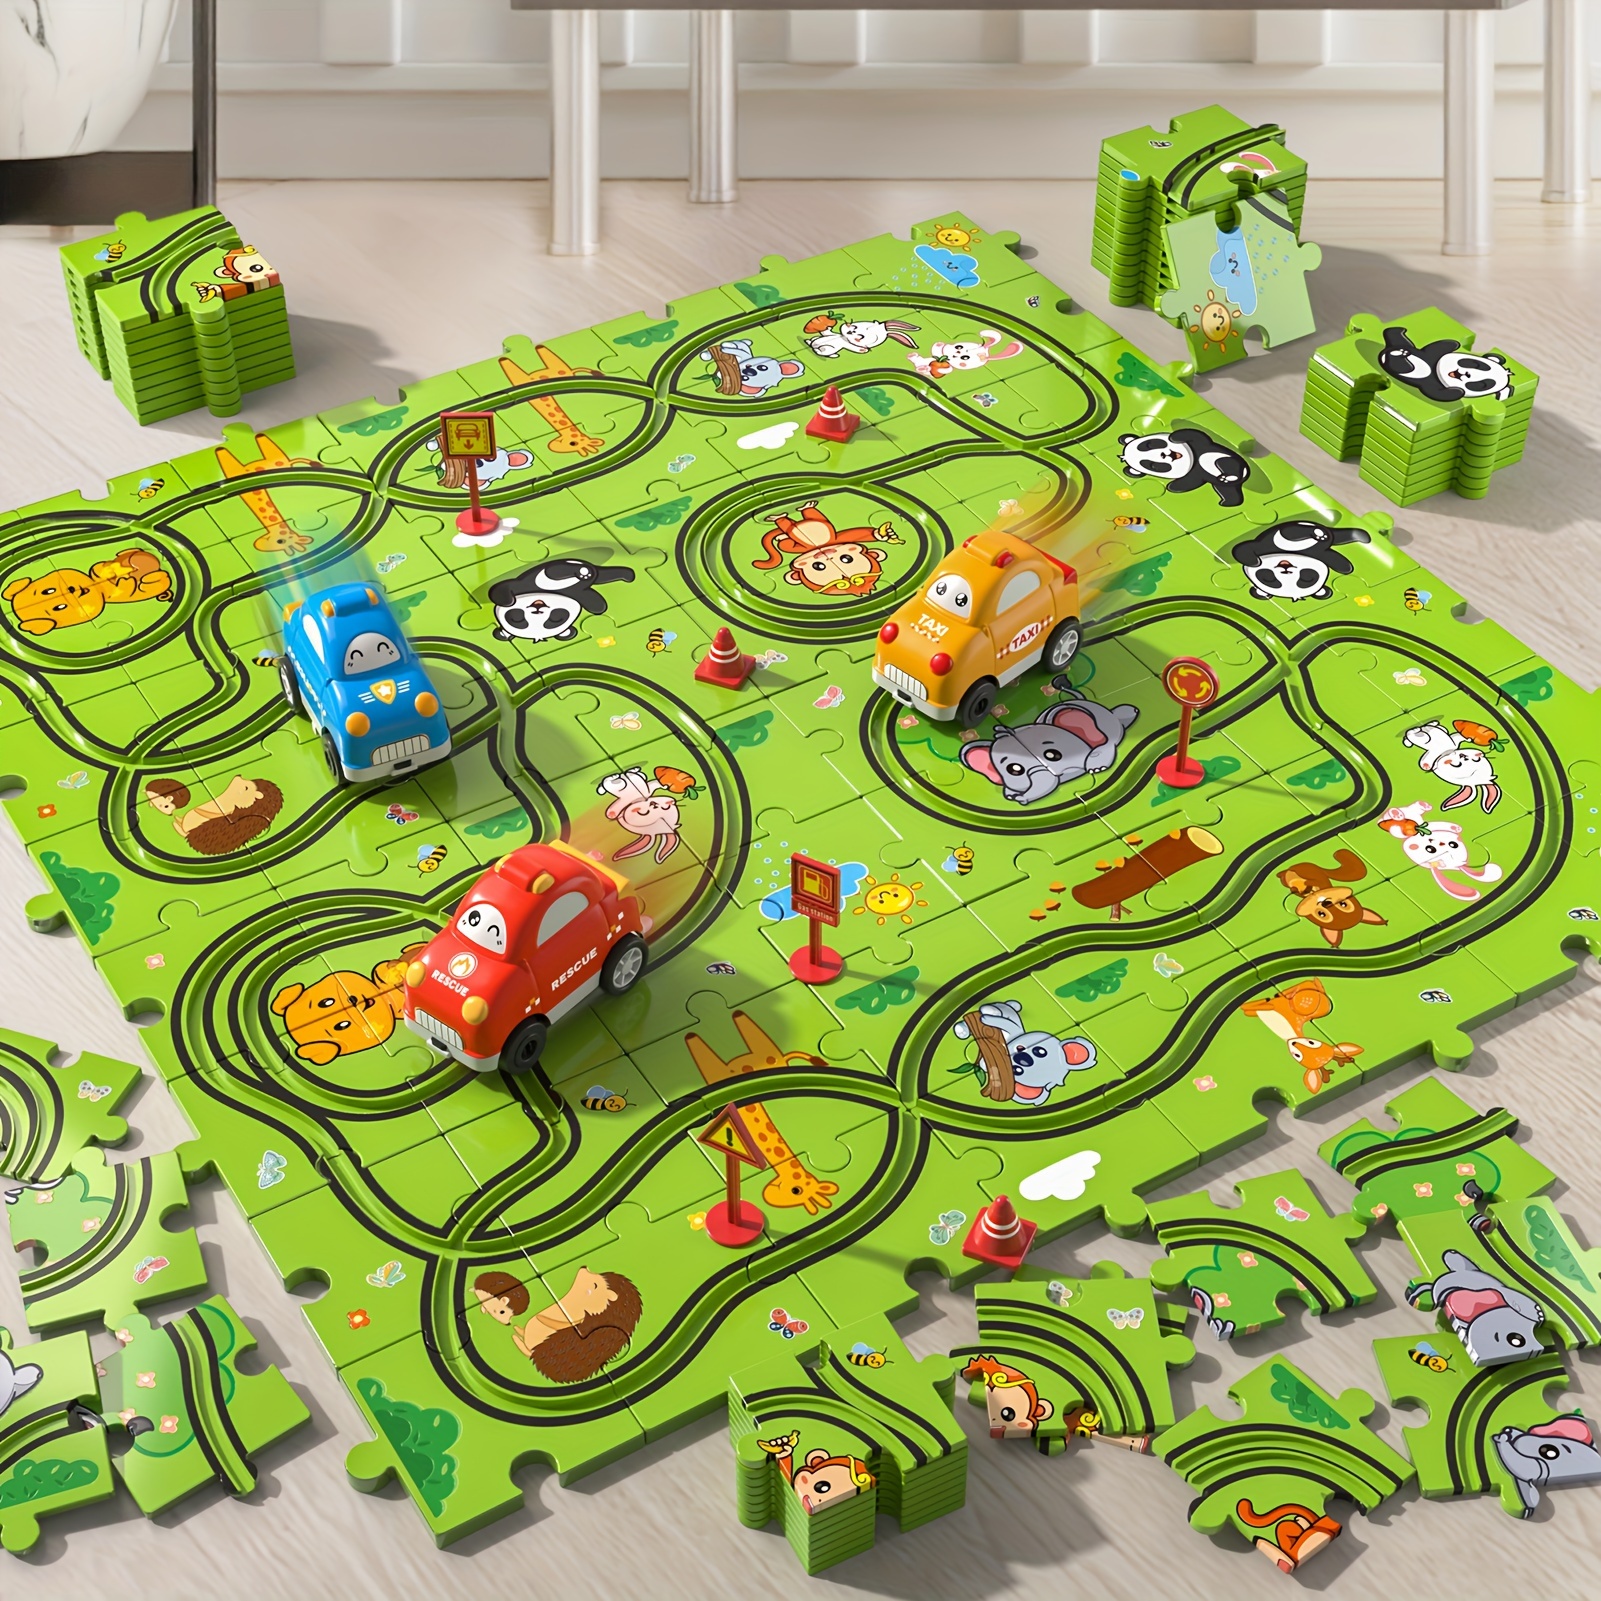 

Race Track Car Set Toys For Kids Boys, Puzzle Tracks Car Toys Gifts For Boys Kids